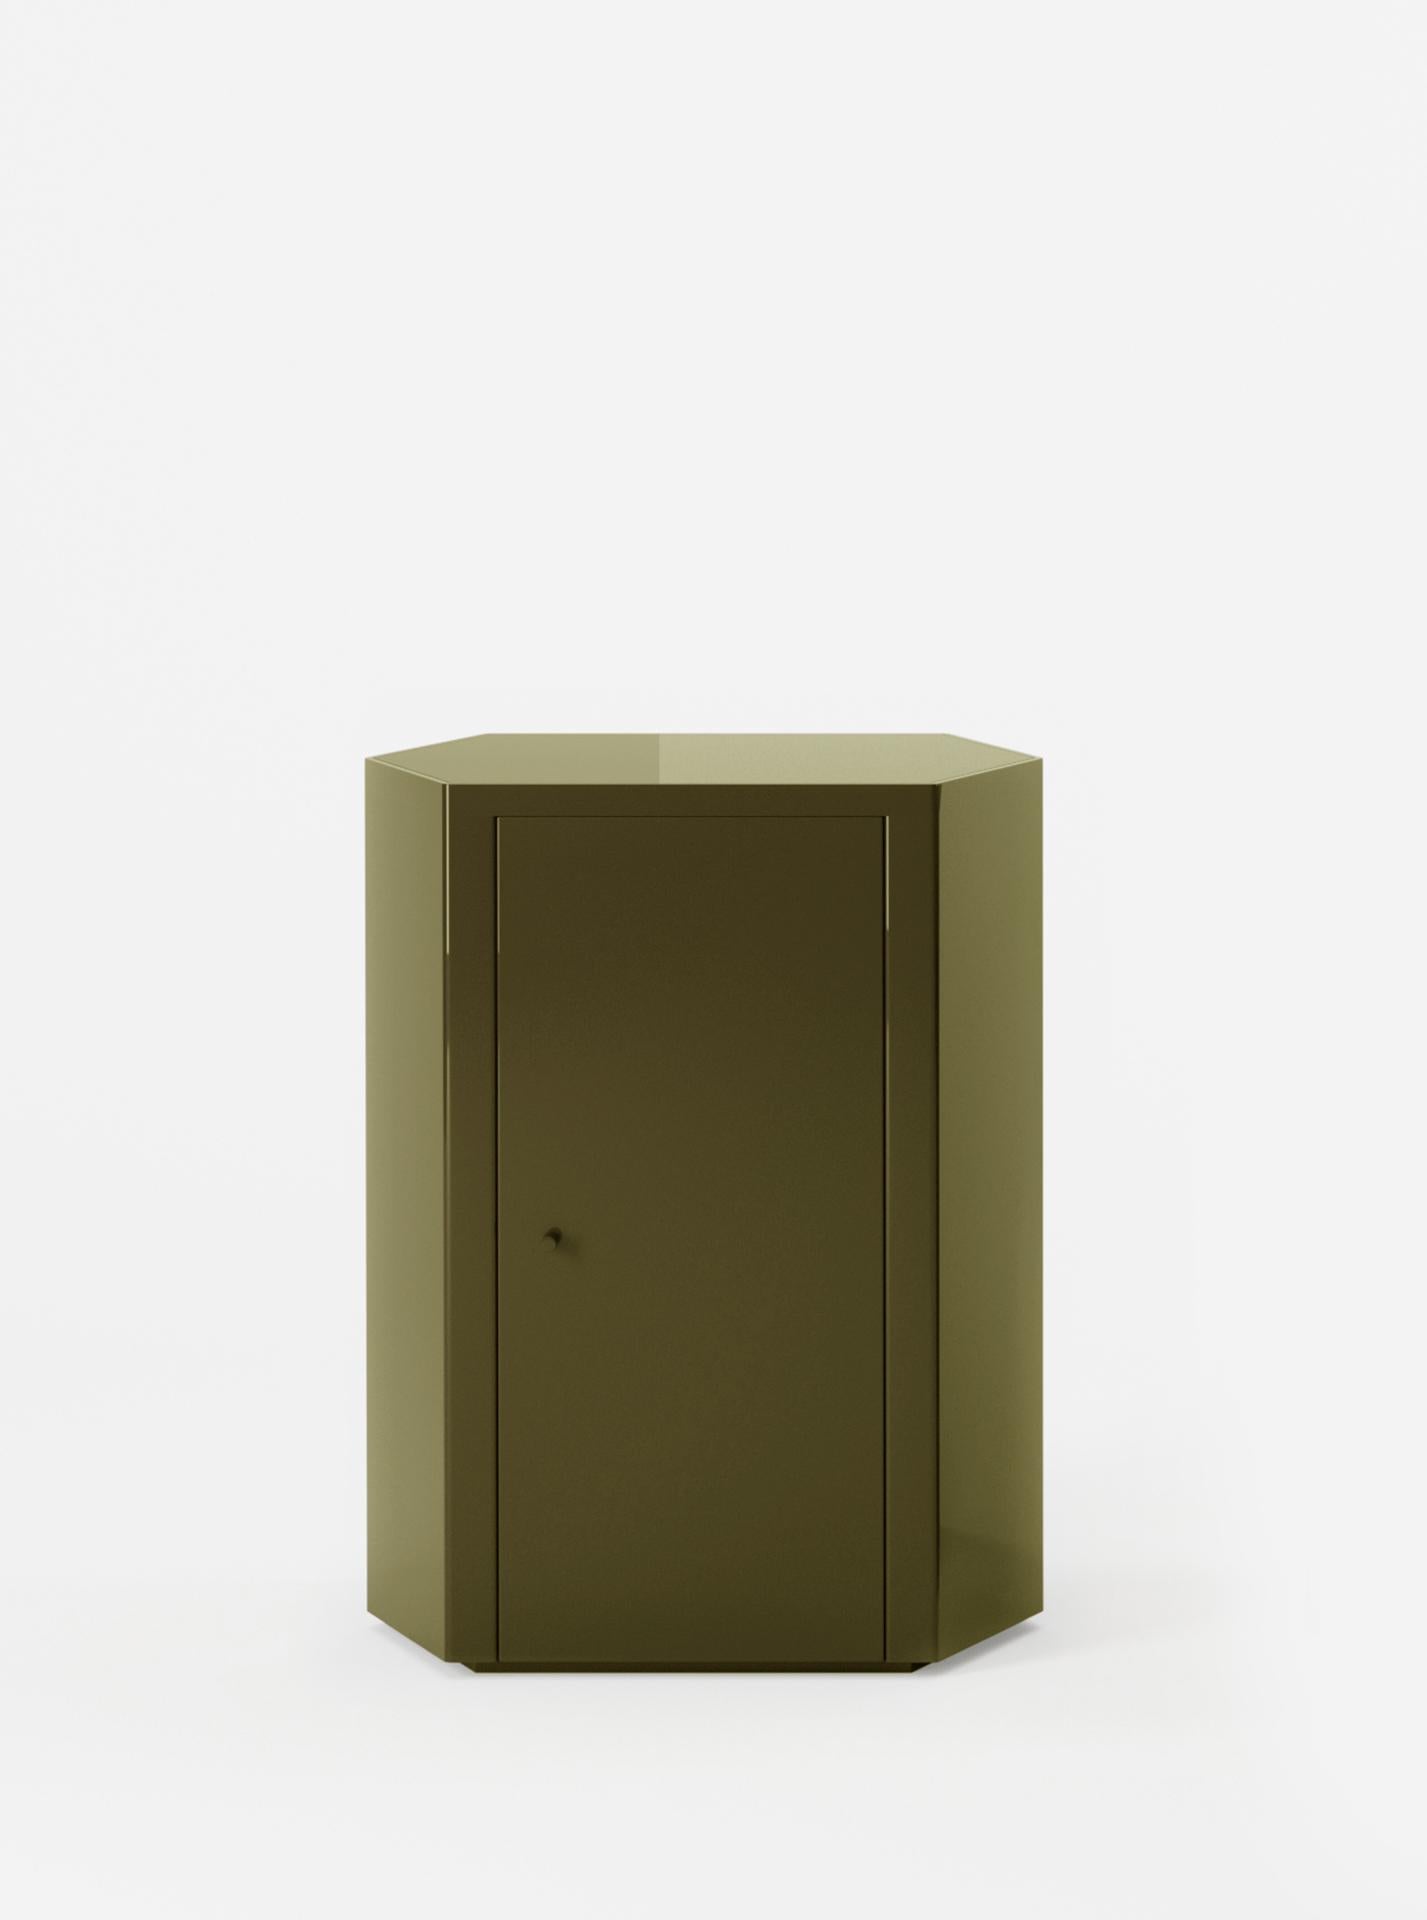 Minimalist Pair of Park Night Stands in Uniform Olive Green Lacquer by Yaniv Chen for Lemon For Sale